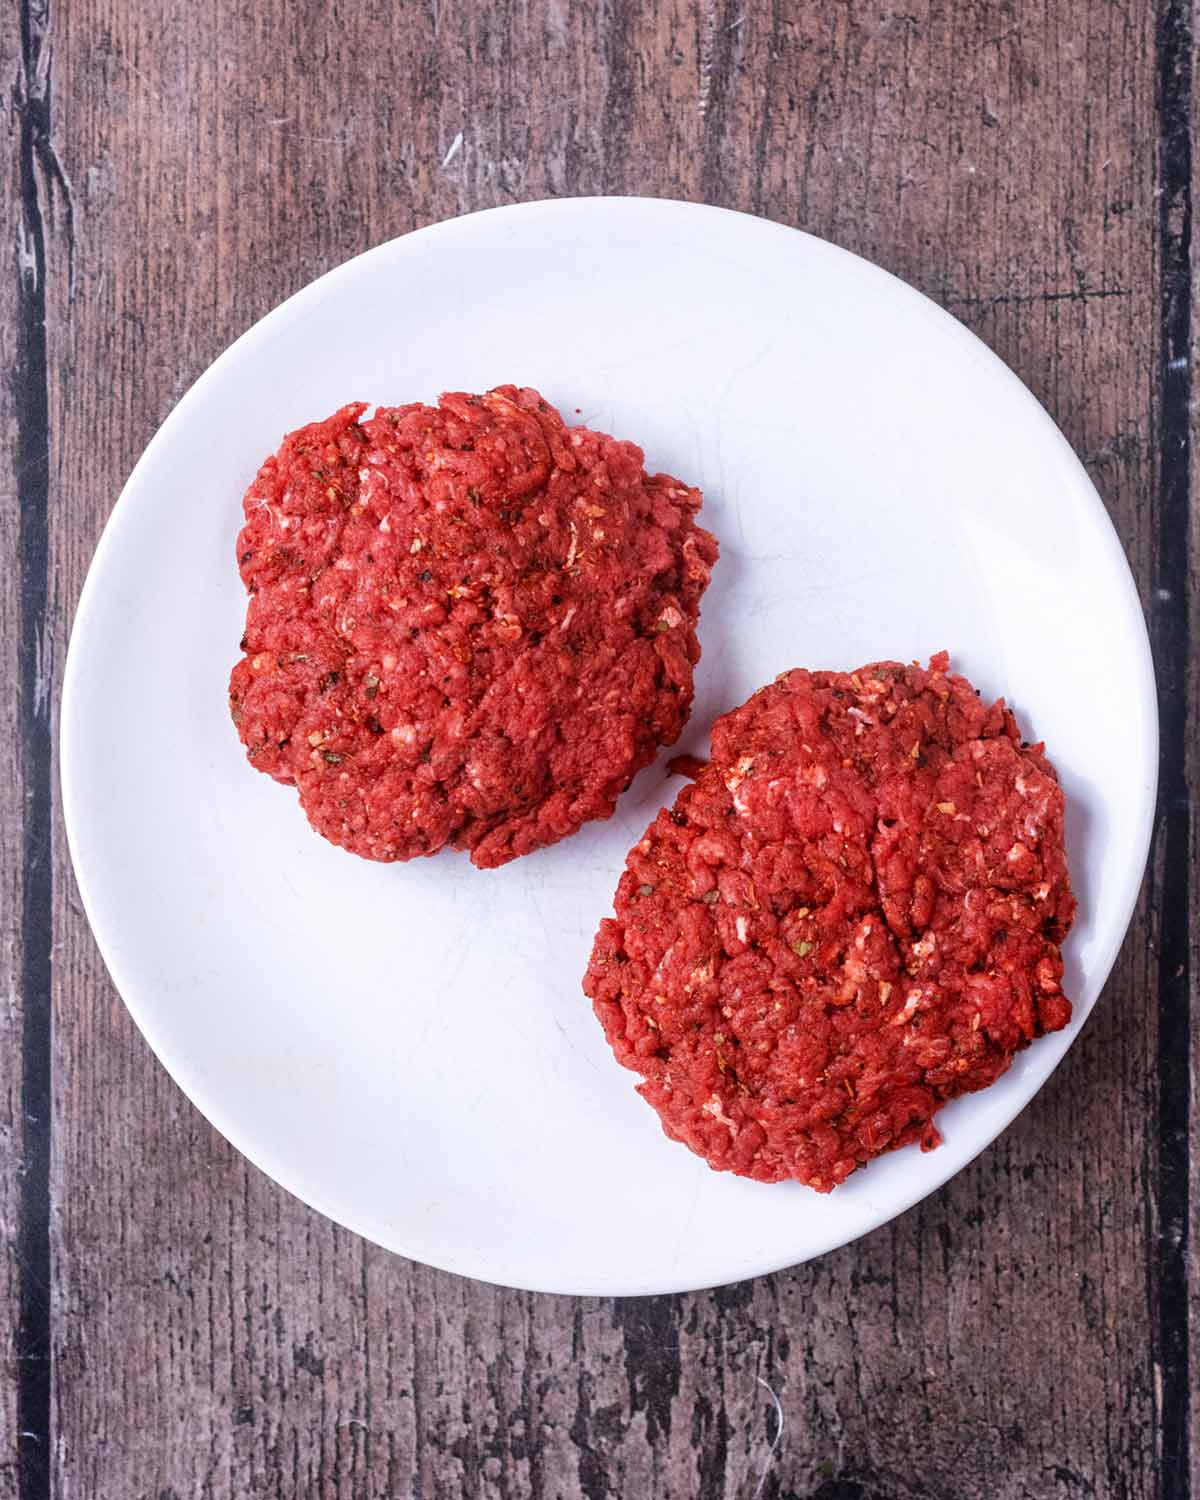 Two uncooked burger patties on a white plate.